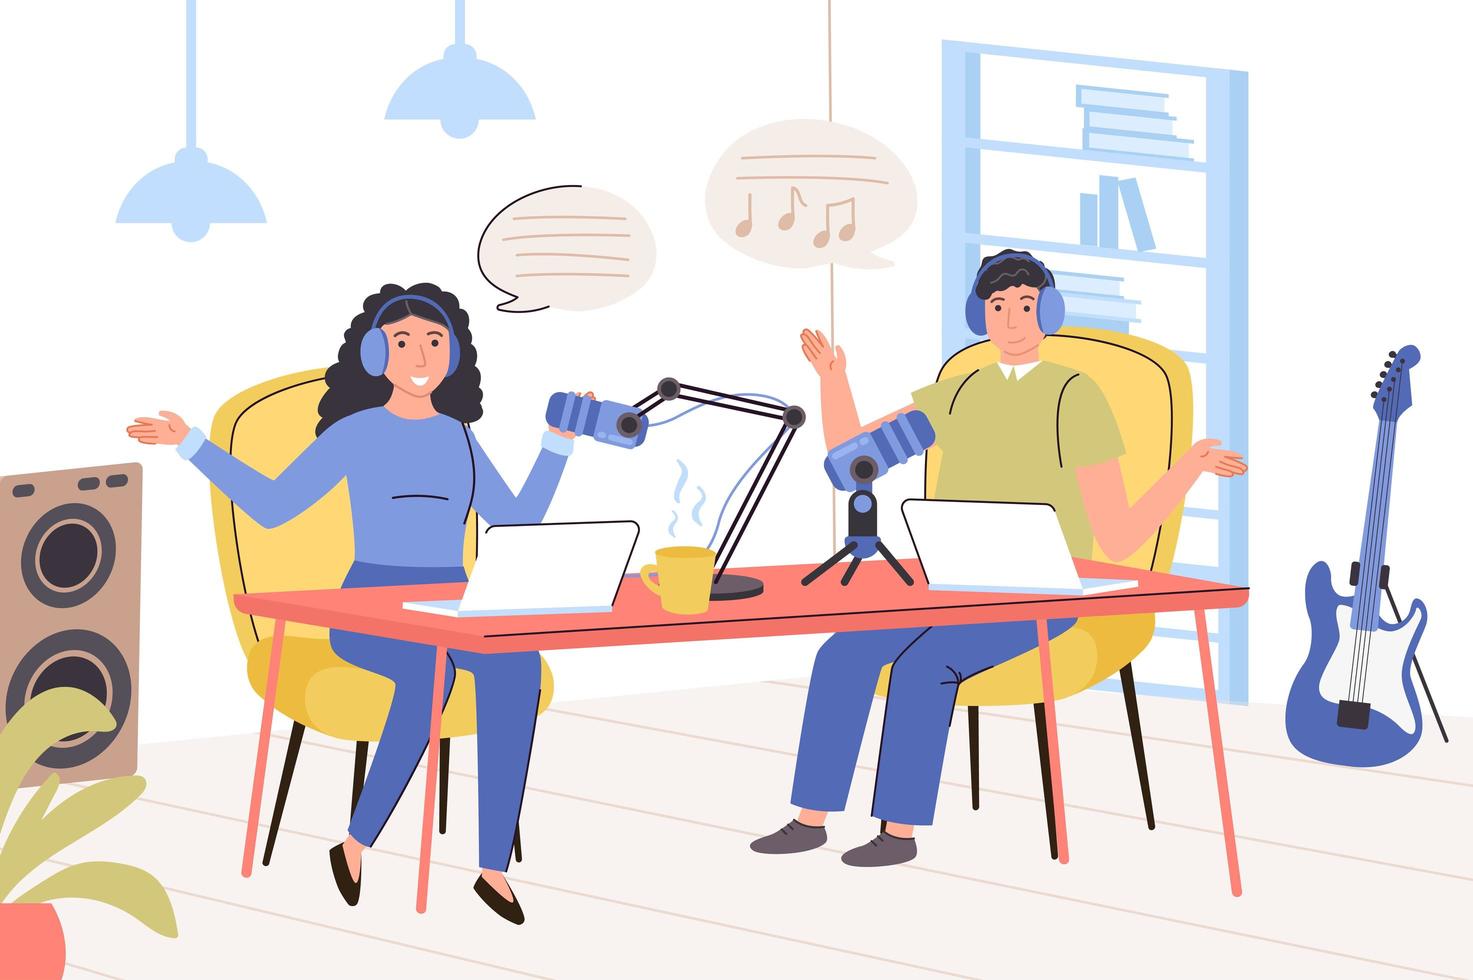 Recording audio podcast concept. Man and woman with headphones talking to microphone, recording conversation or interview, live stream or educational lecture. Vector illustration in trendy flat design